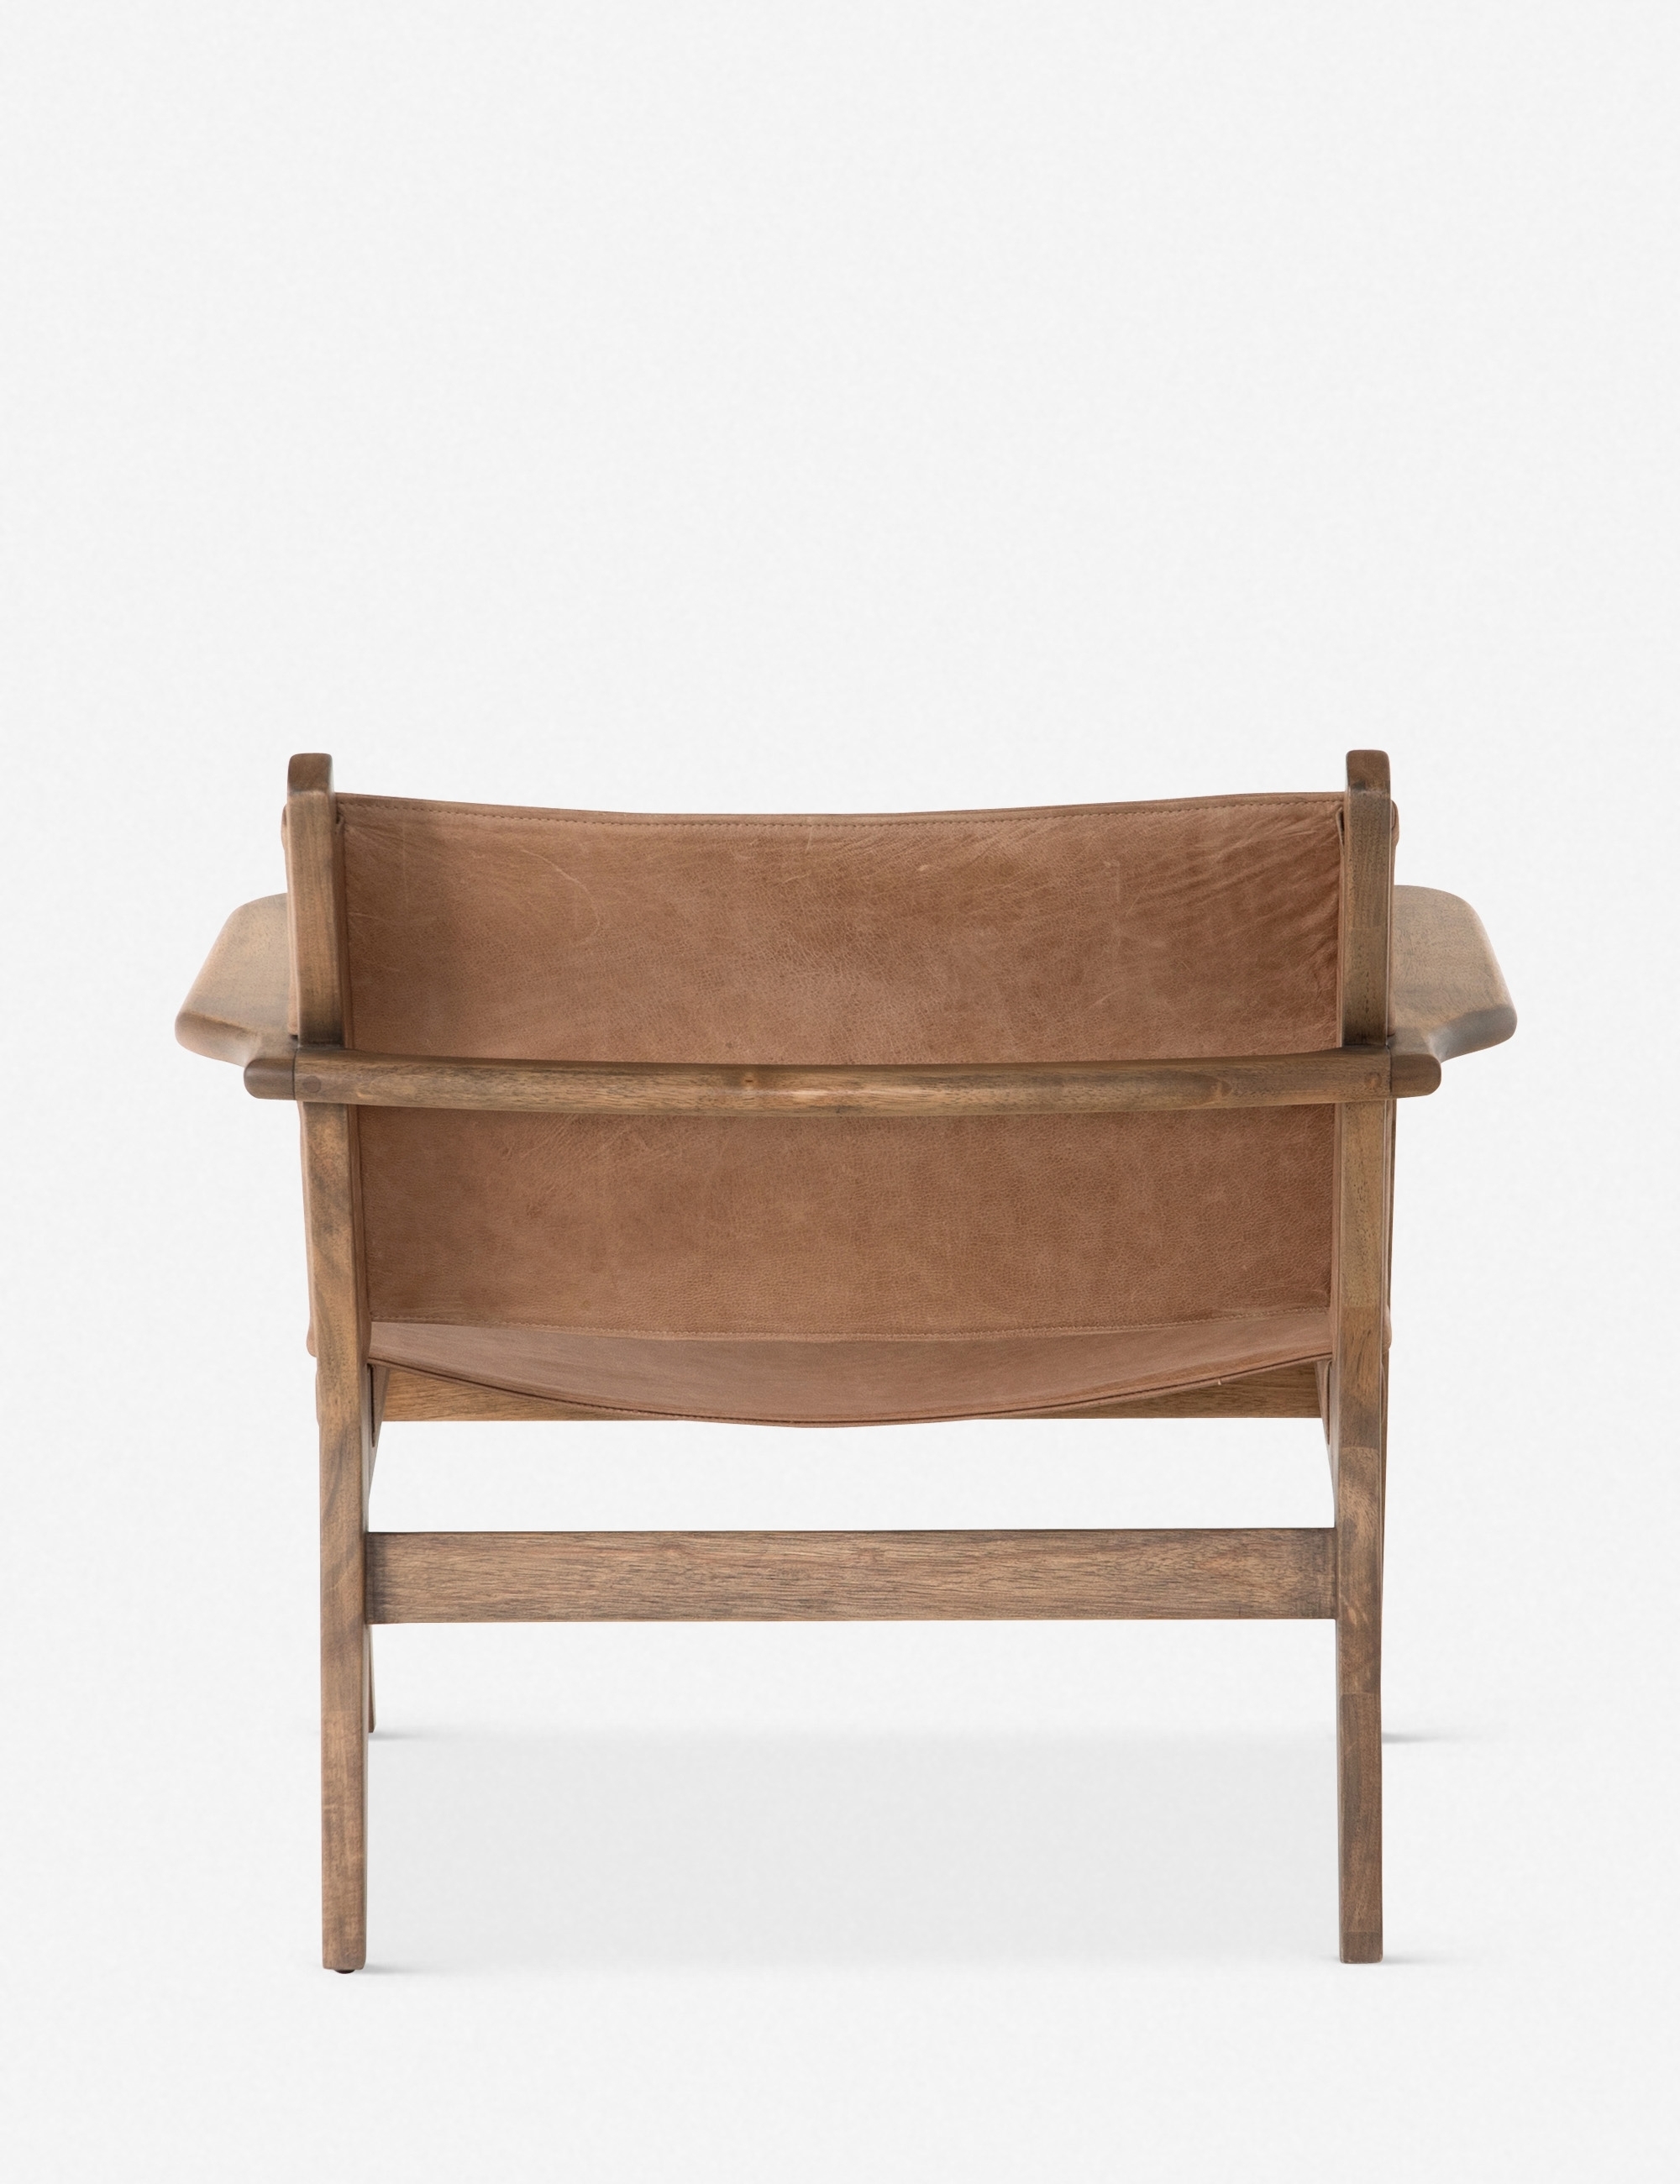 Sela Leather Accent Chair - Image 3